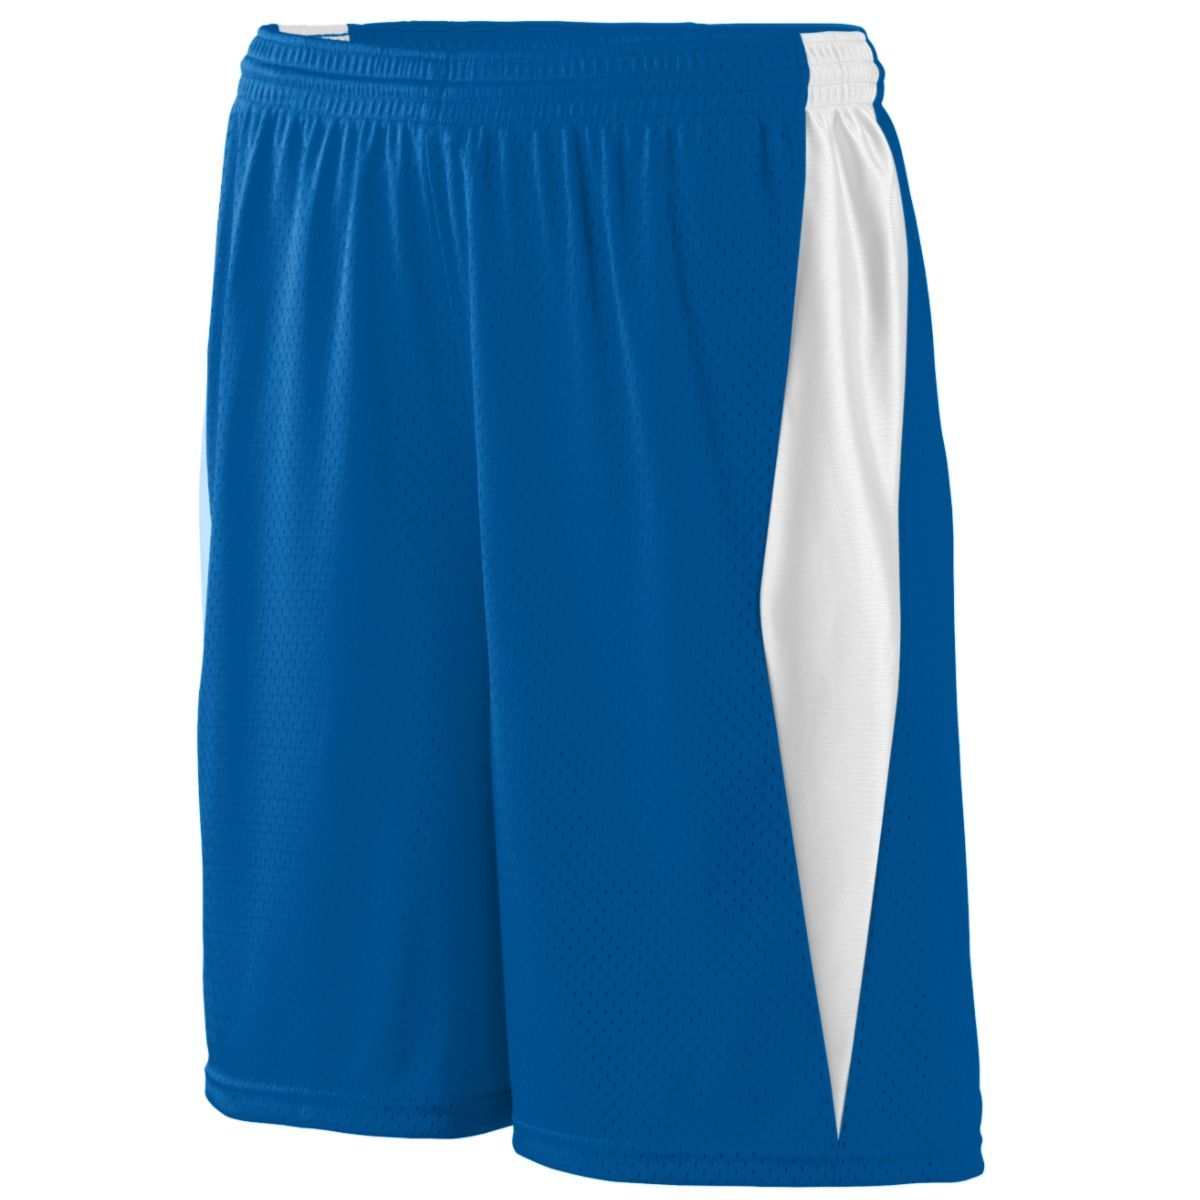 Augusta Sportswear Top Score Shorts in Royal/White  -Part of the Adult, Adult-Shorts, Augusta-Products, Lacrosse, All-Sports, All-Sports-1 product lines at KanaleyCreations.com